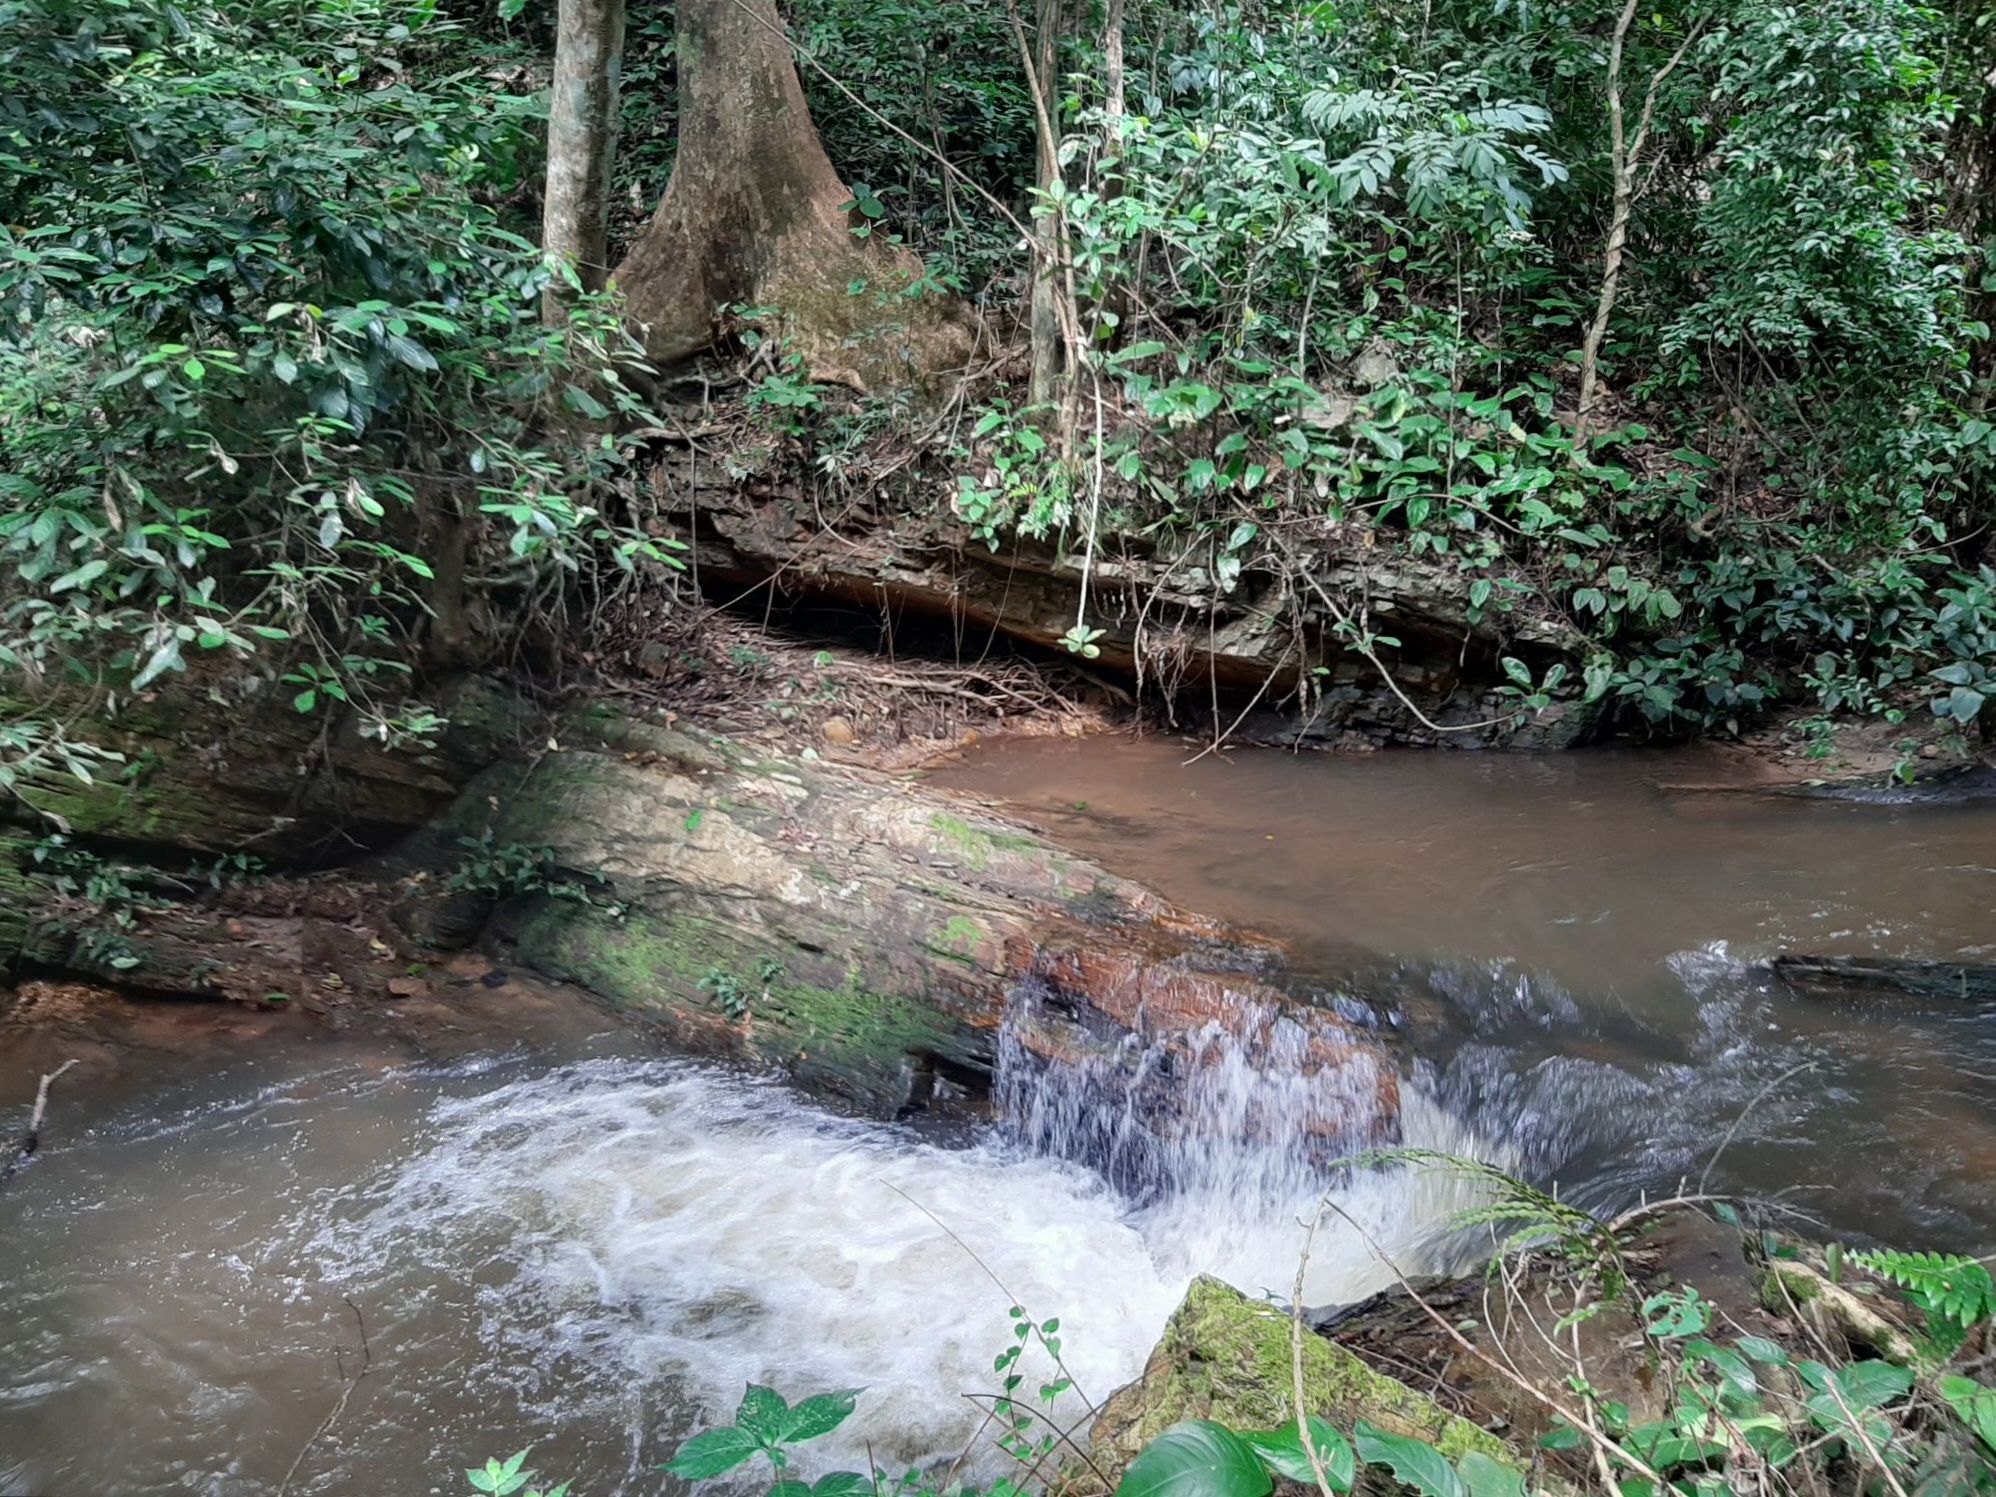 Caption: A view of the rushing flow of stream No 5  on the walk to the waterfalls. Shot by LG @shola4sure